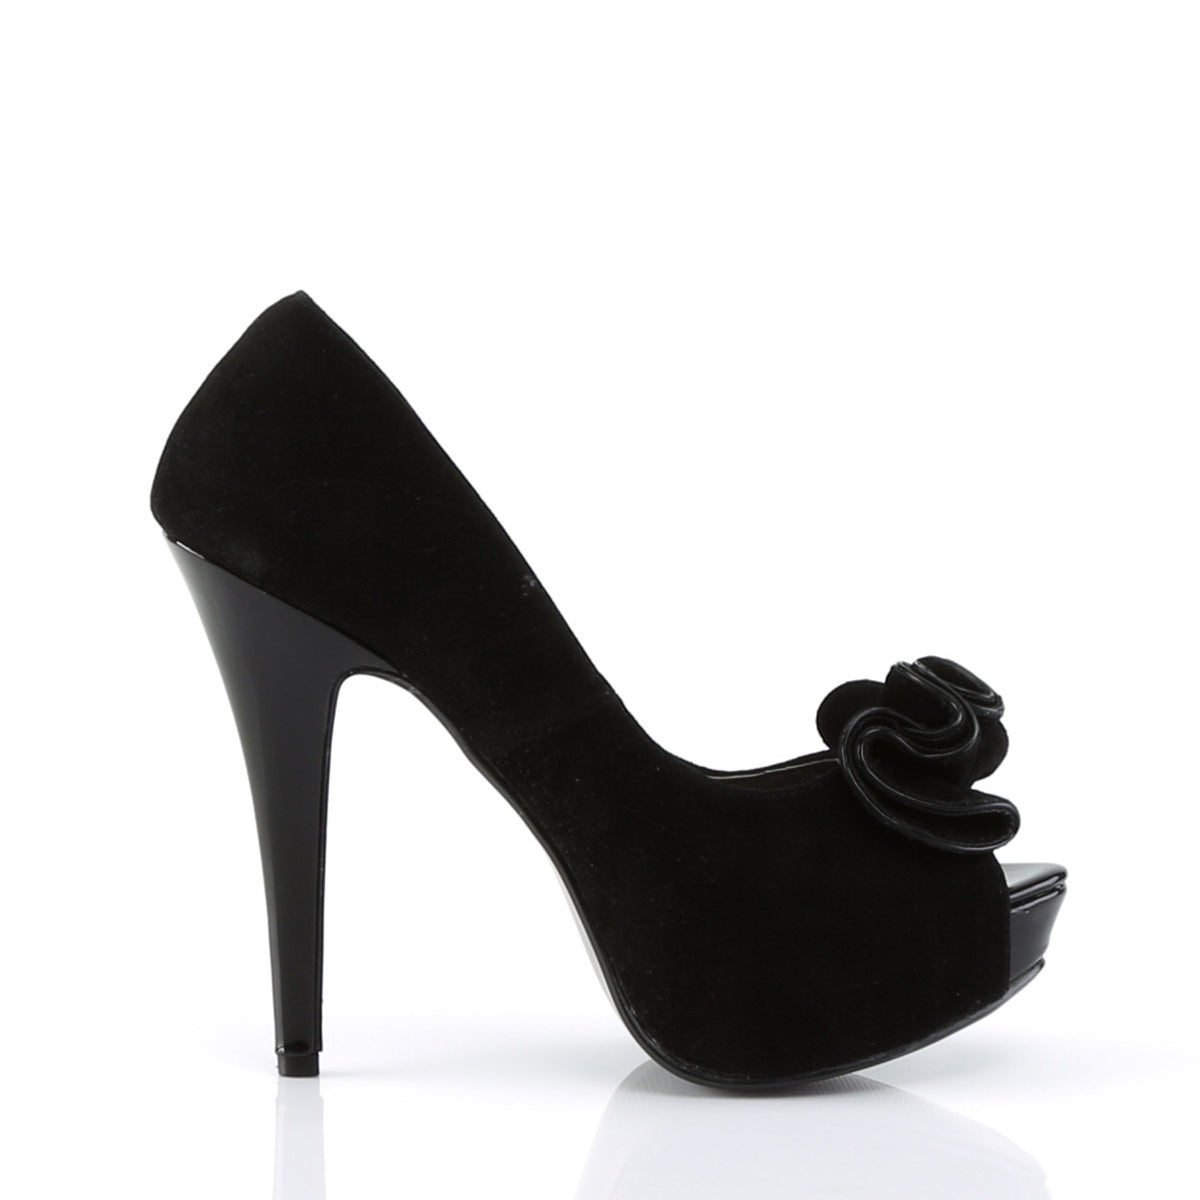 LOLITA-10 Pin Up 5" Heel Black Suede Pu Retro Pin Up Shoes-Pin Up Couture- Sexy Shoes Fetish Heels